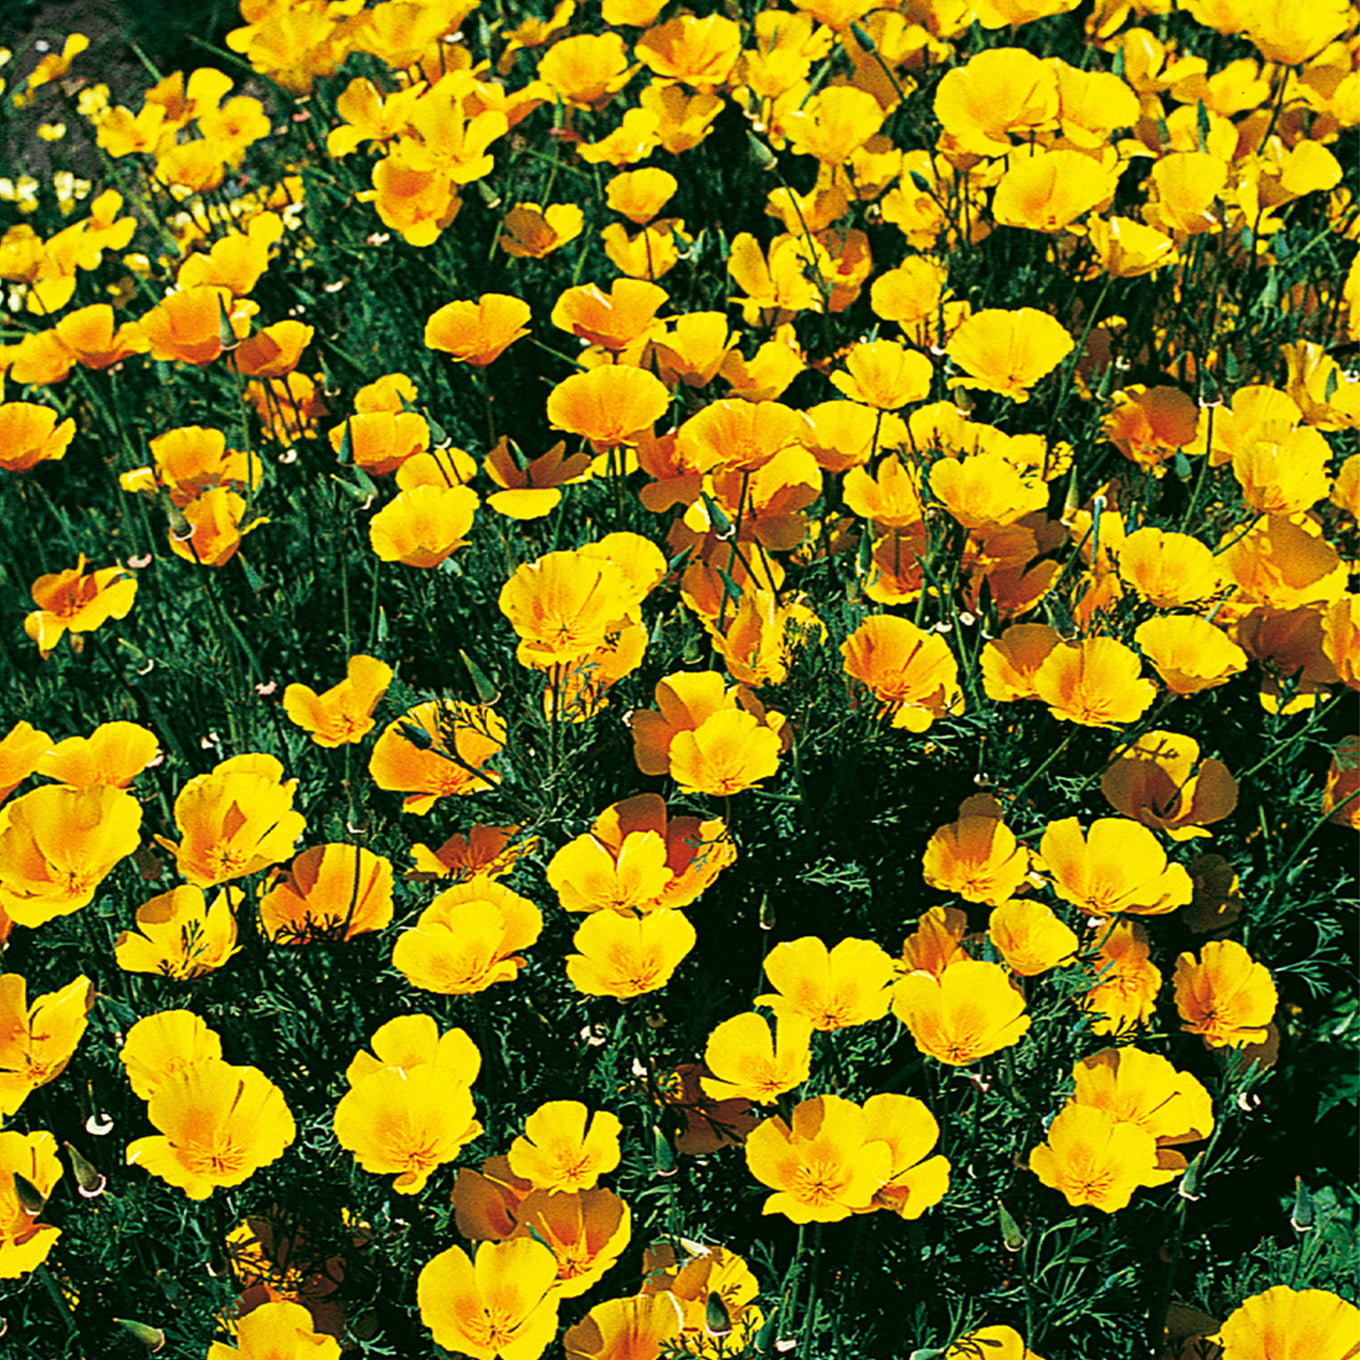 Extra Golden California Poppy flowers in a sea of beautiful bluish-green foliage. Picture shows mature California poppies.